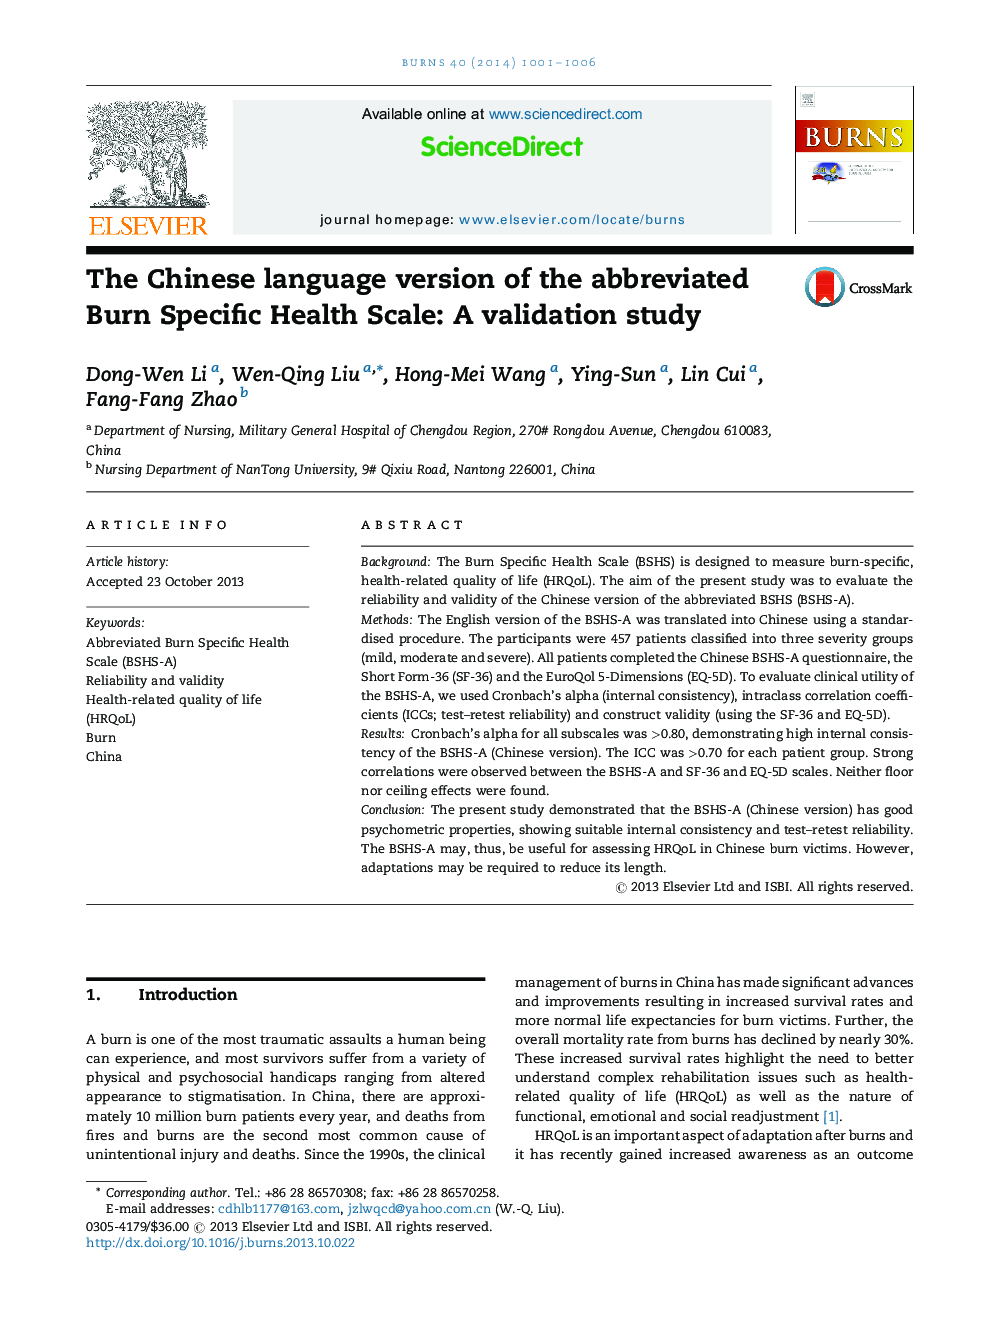 The Chinese language version of the abbreviated Burn Specific Health Scale: A validation study